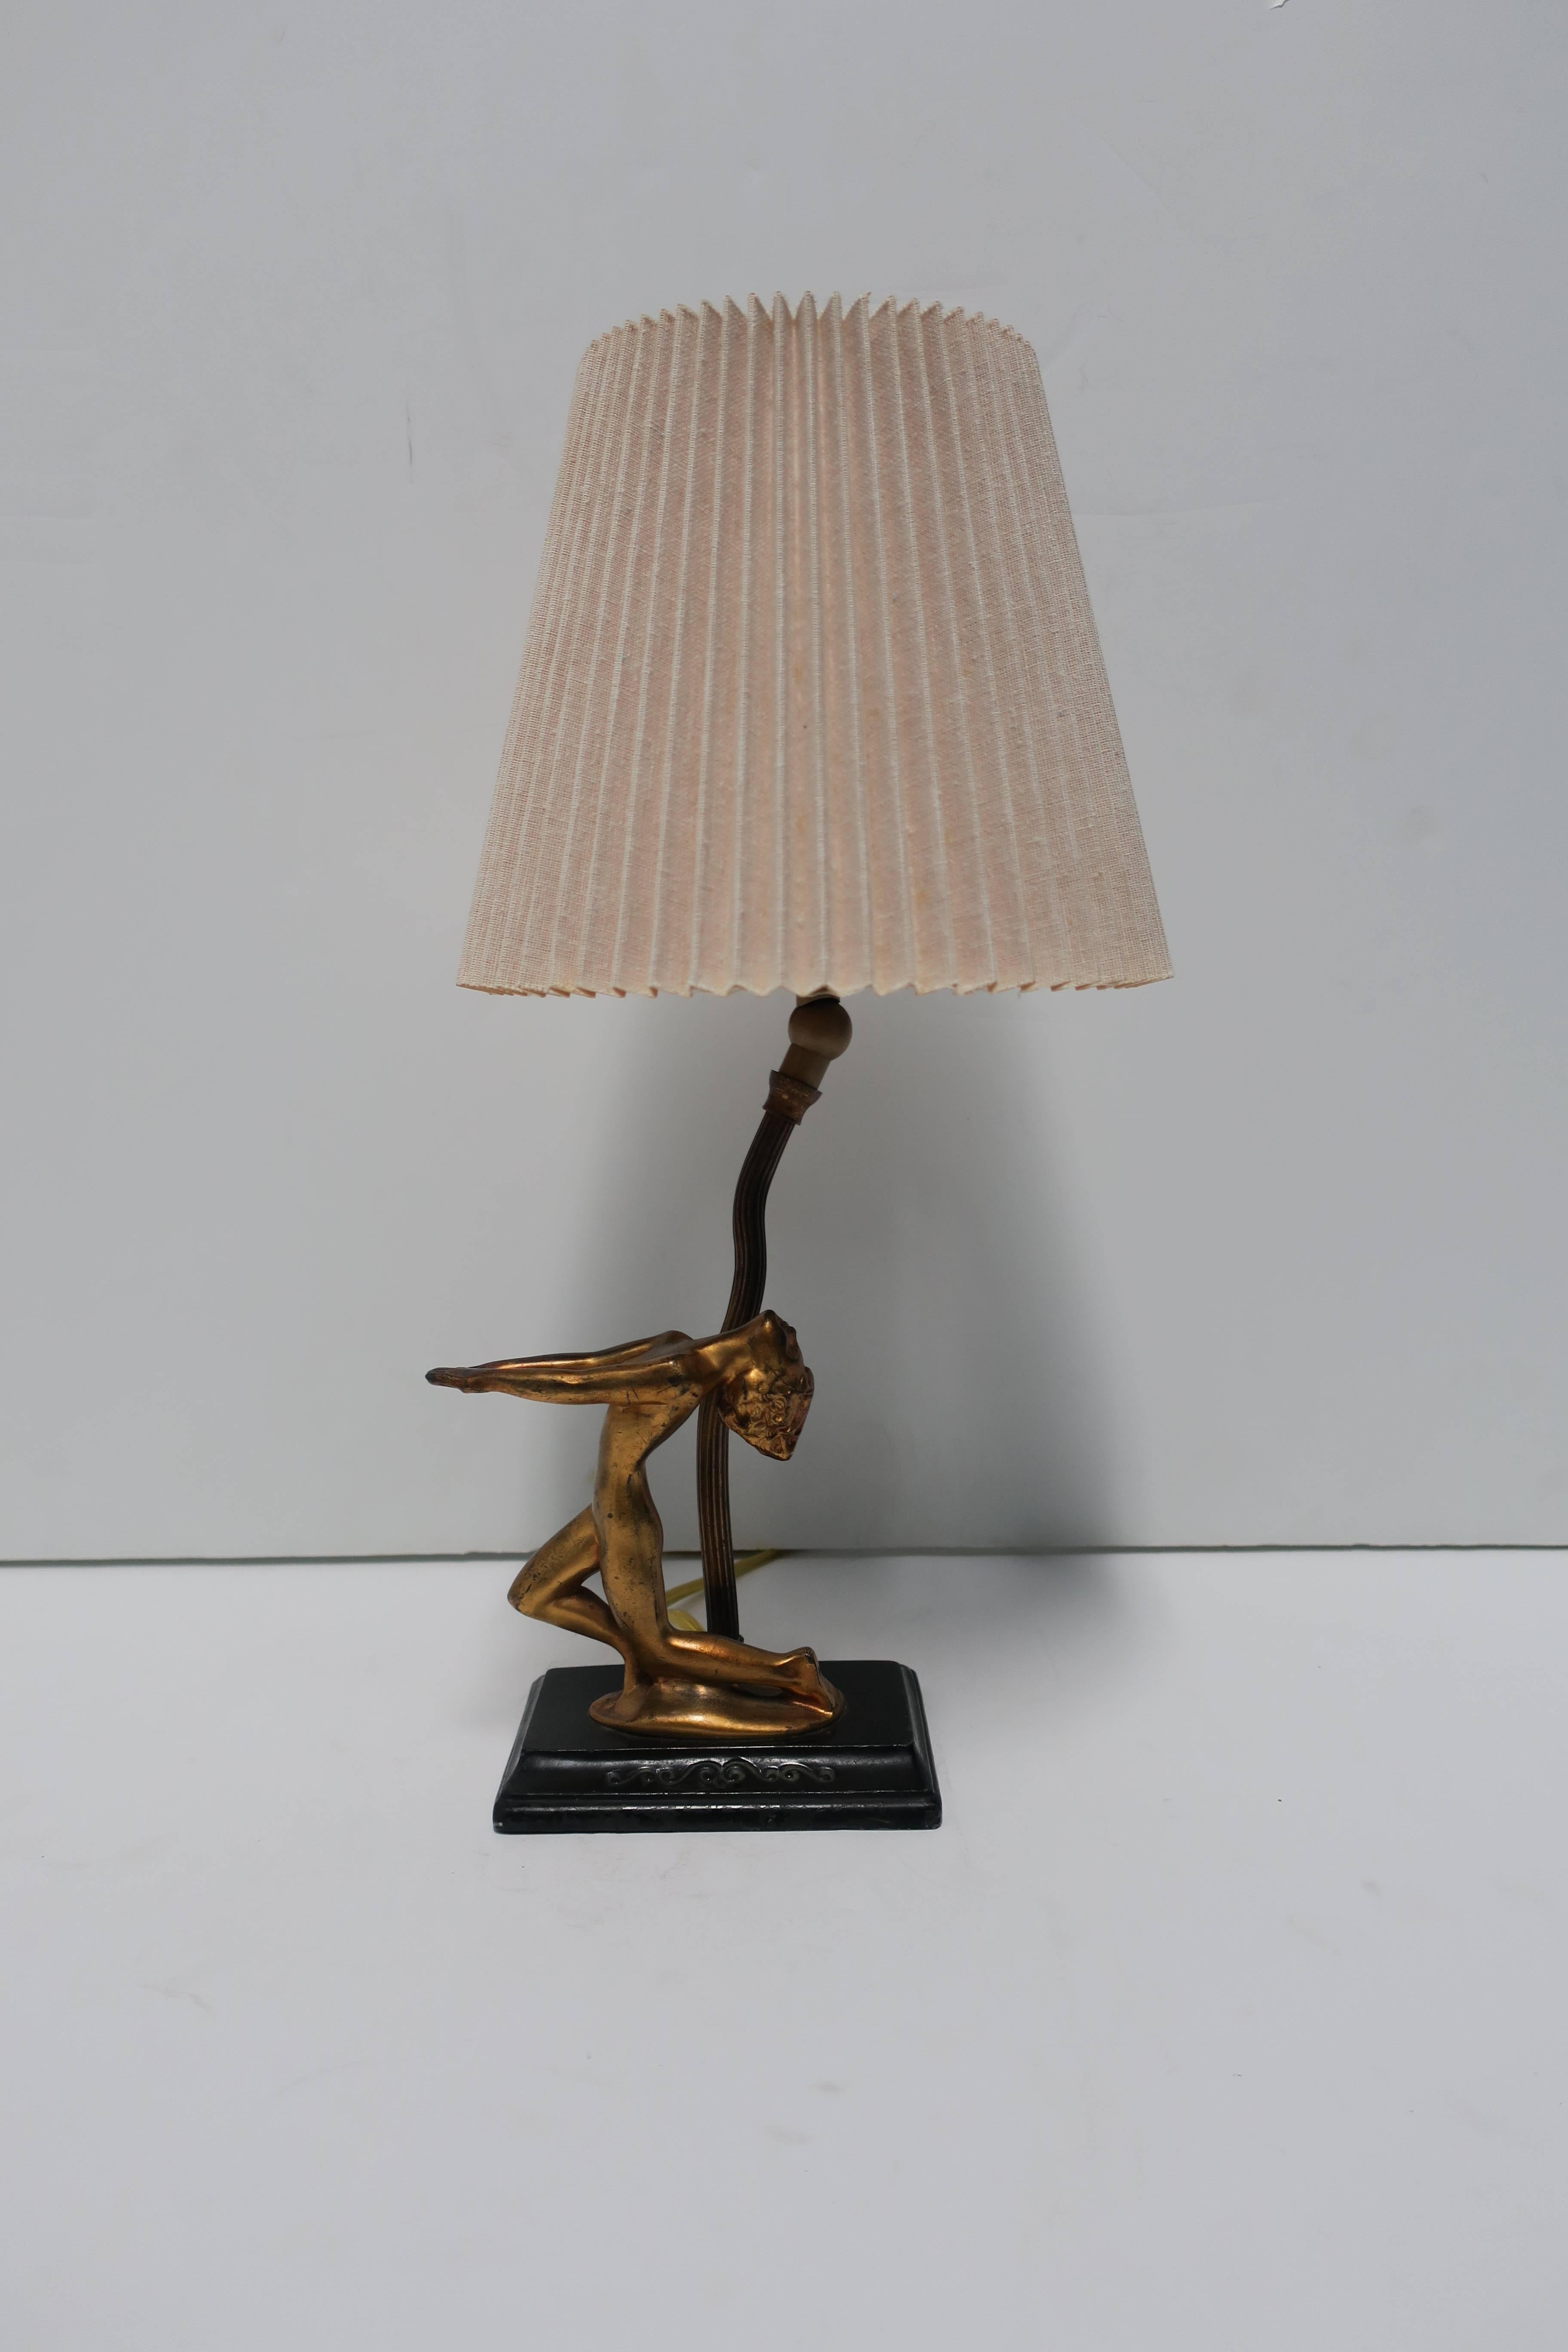 A beautiful Art Deco period black and gold gilt desk or table lamp with female sculpture figure posing on rectangular base, circa 1930s. Lamp is attributed to Frankart. Lamp has been rewired to US specifications as shown in images. Vintage pleated